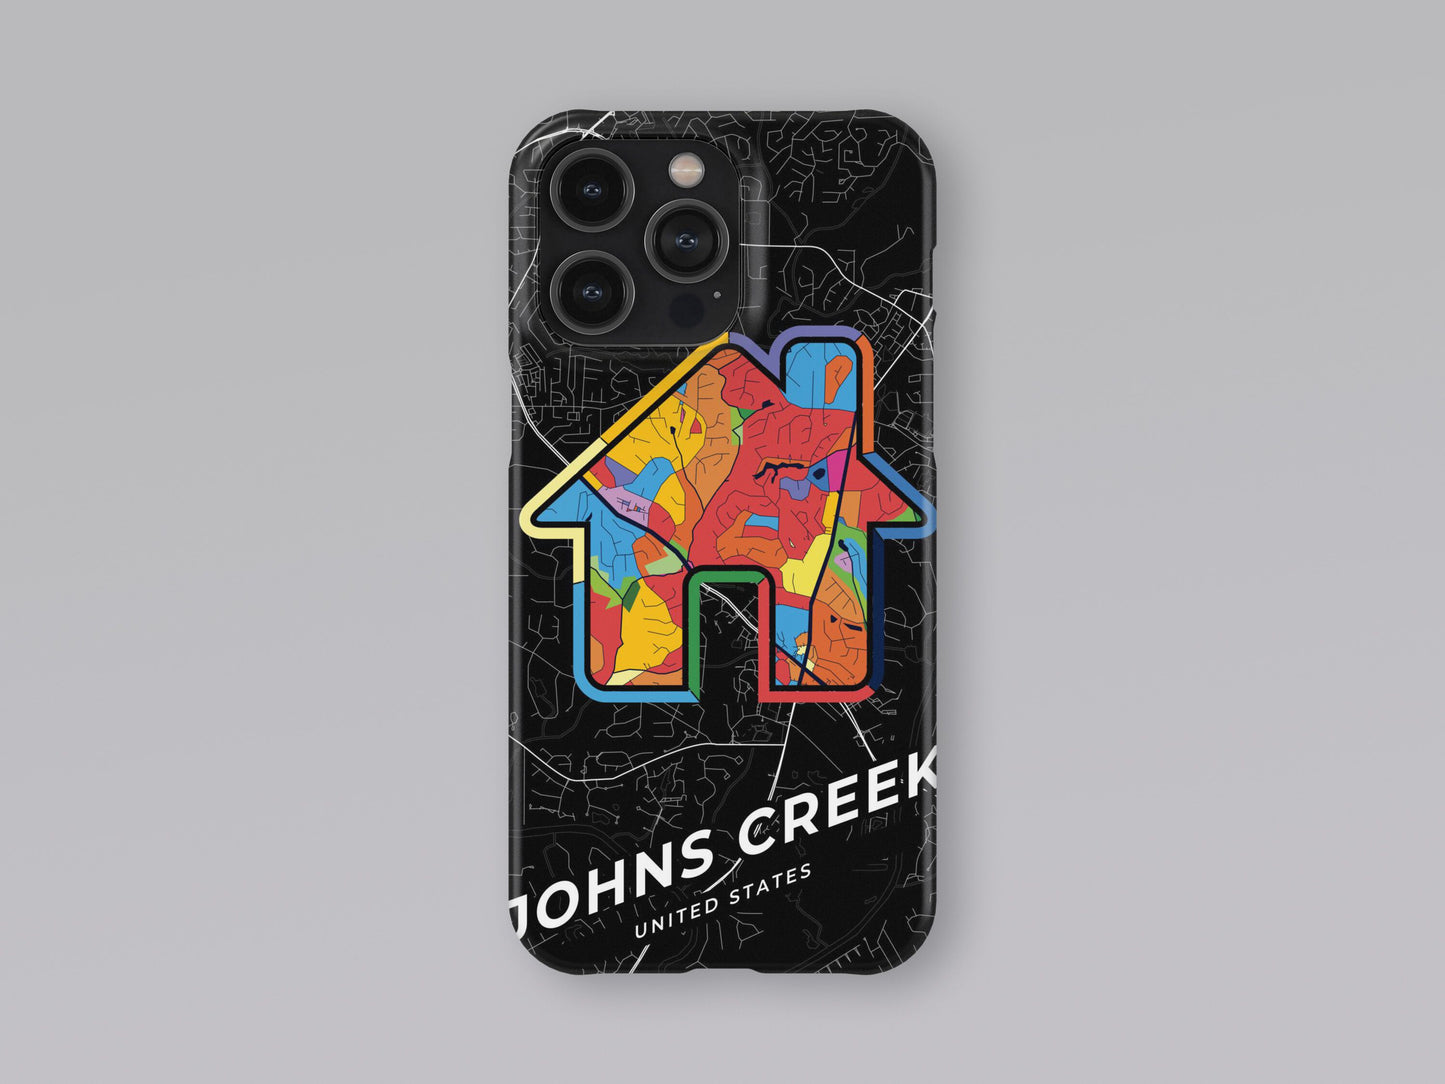 Johns Creek Georgia slim phone case with colorful icon. Birthday, wedding or housewarming gift. Couple match cases. 3